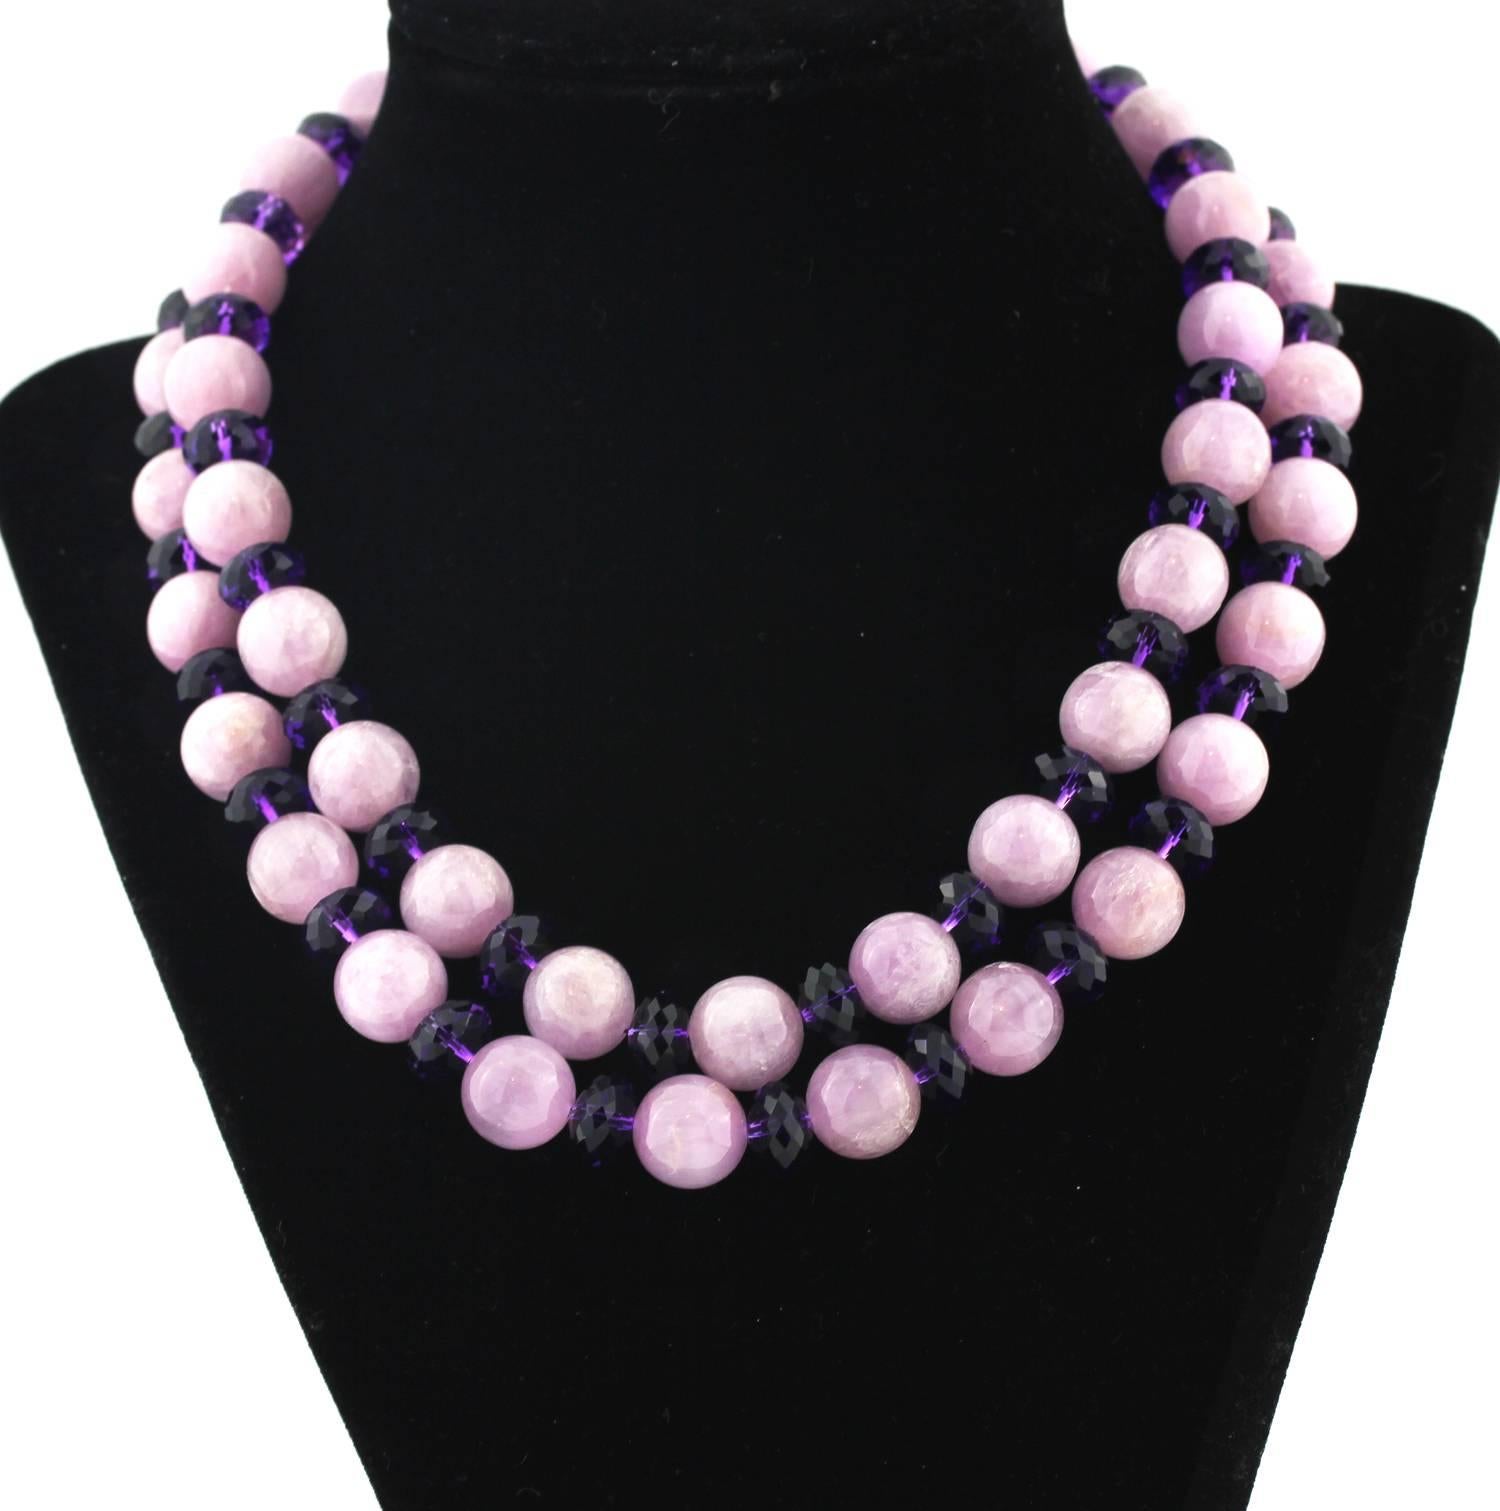 Gemjunky Double strand of natural unique glowing polished round translucent Kunzite rocks enhanced with gemcut sparkling Amethysts compose this handmade necklace.  Size:  Kunzites approximately 12.5 mm;  Length:  16 inches;  Clasp:  silver tone.  